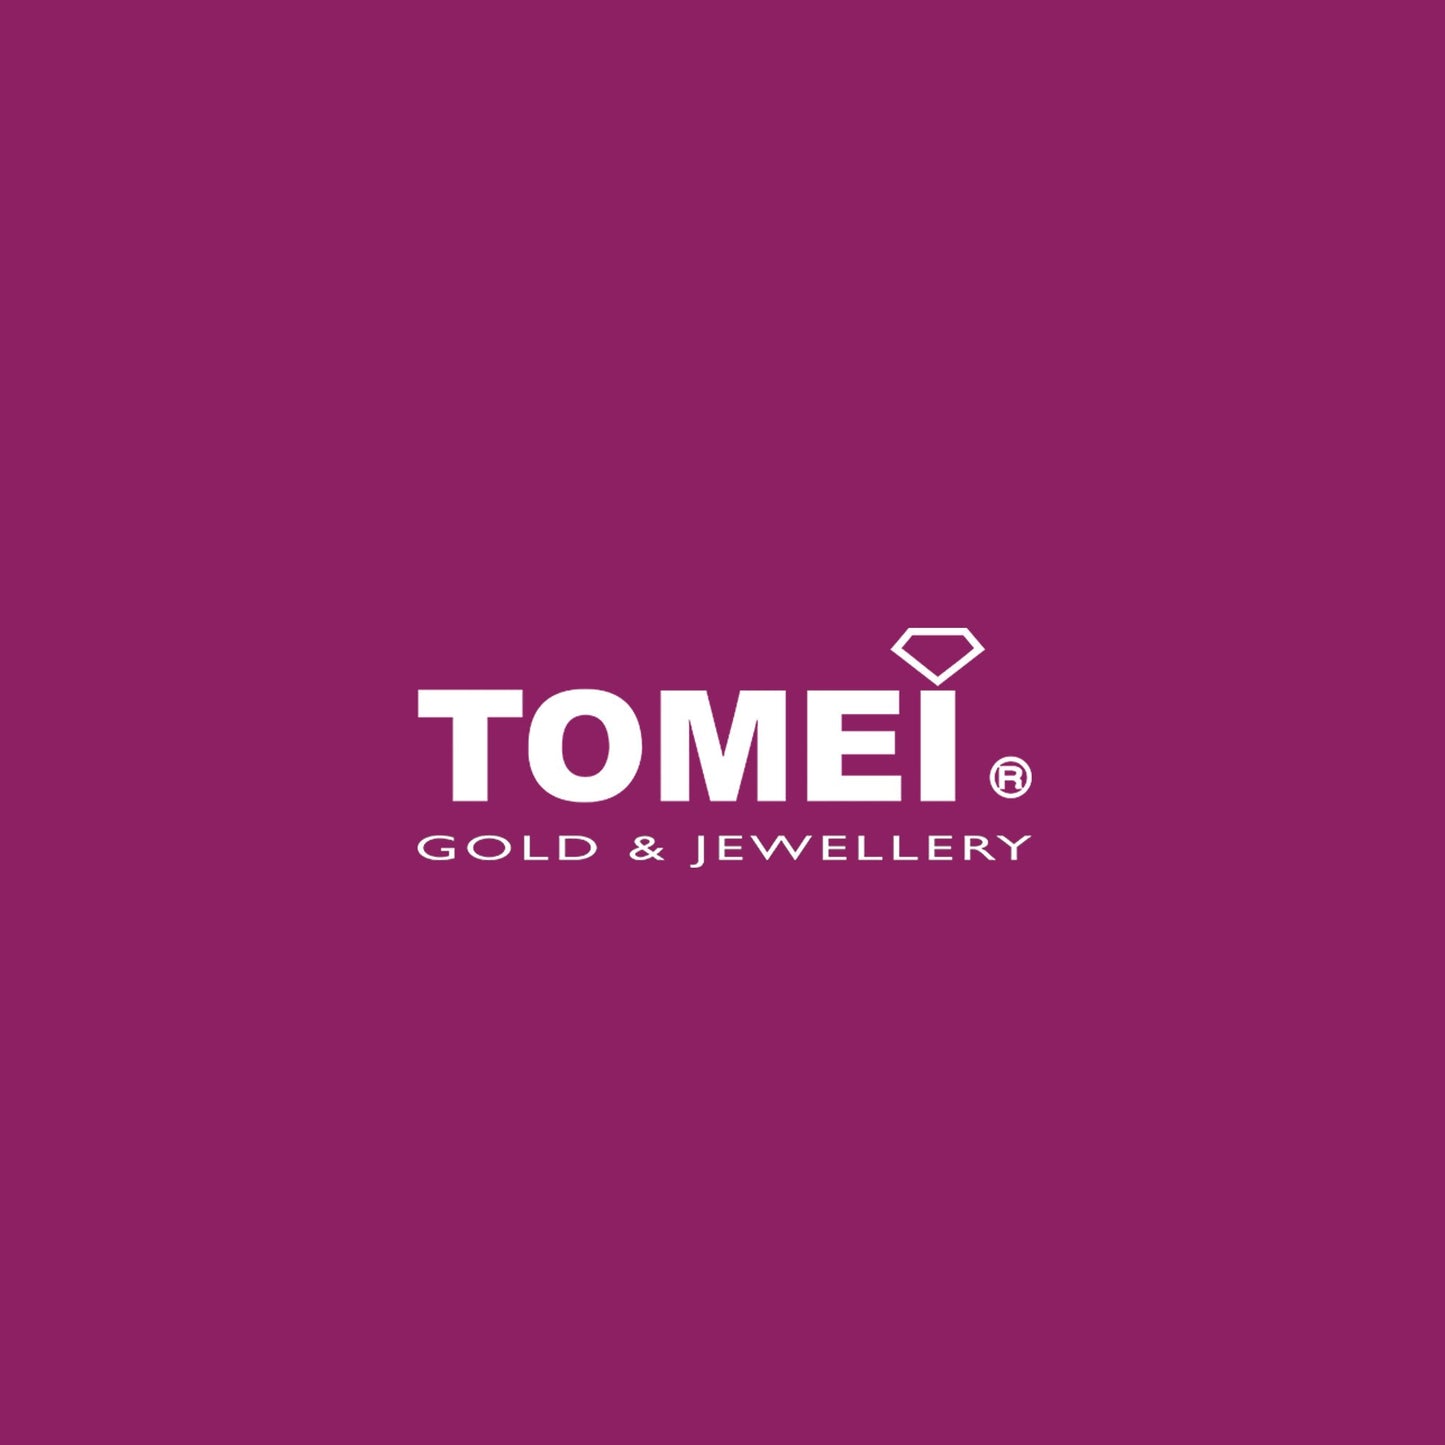 Irresistibly Luminous Pearl and Diamond Necklace | Tomei White Gold 375&585 (P3163V)